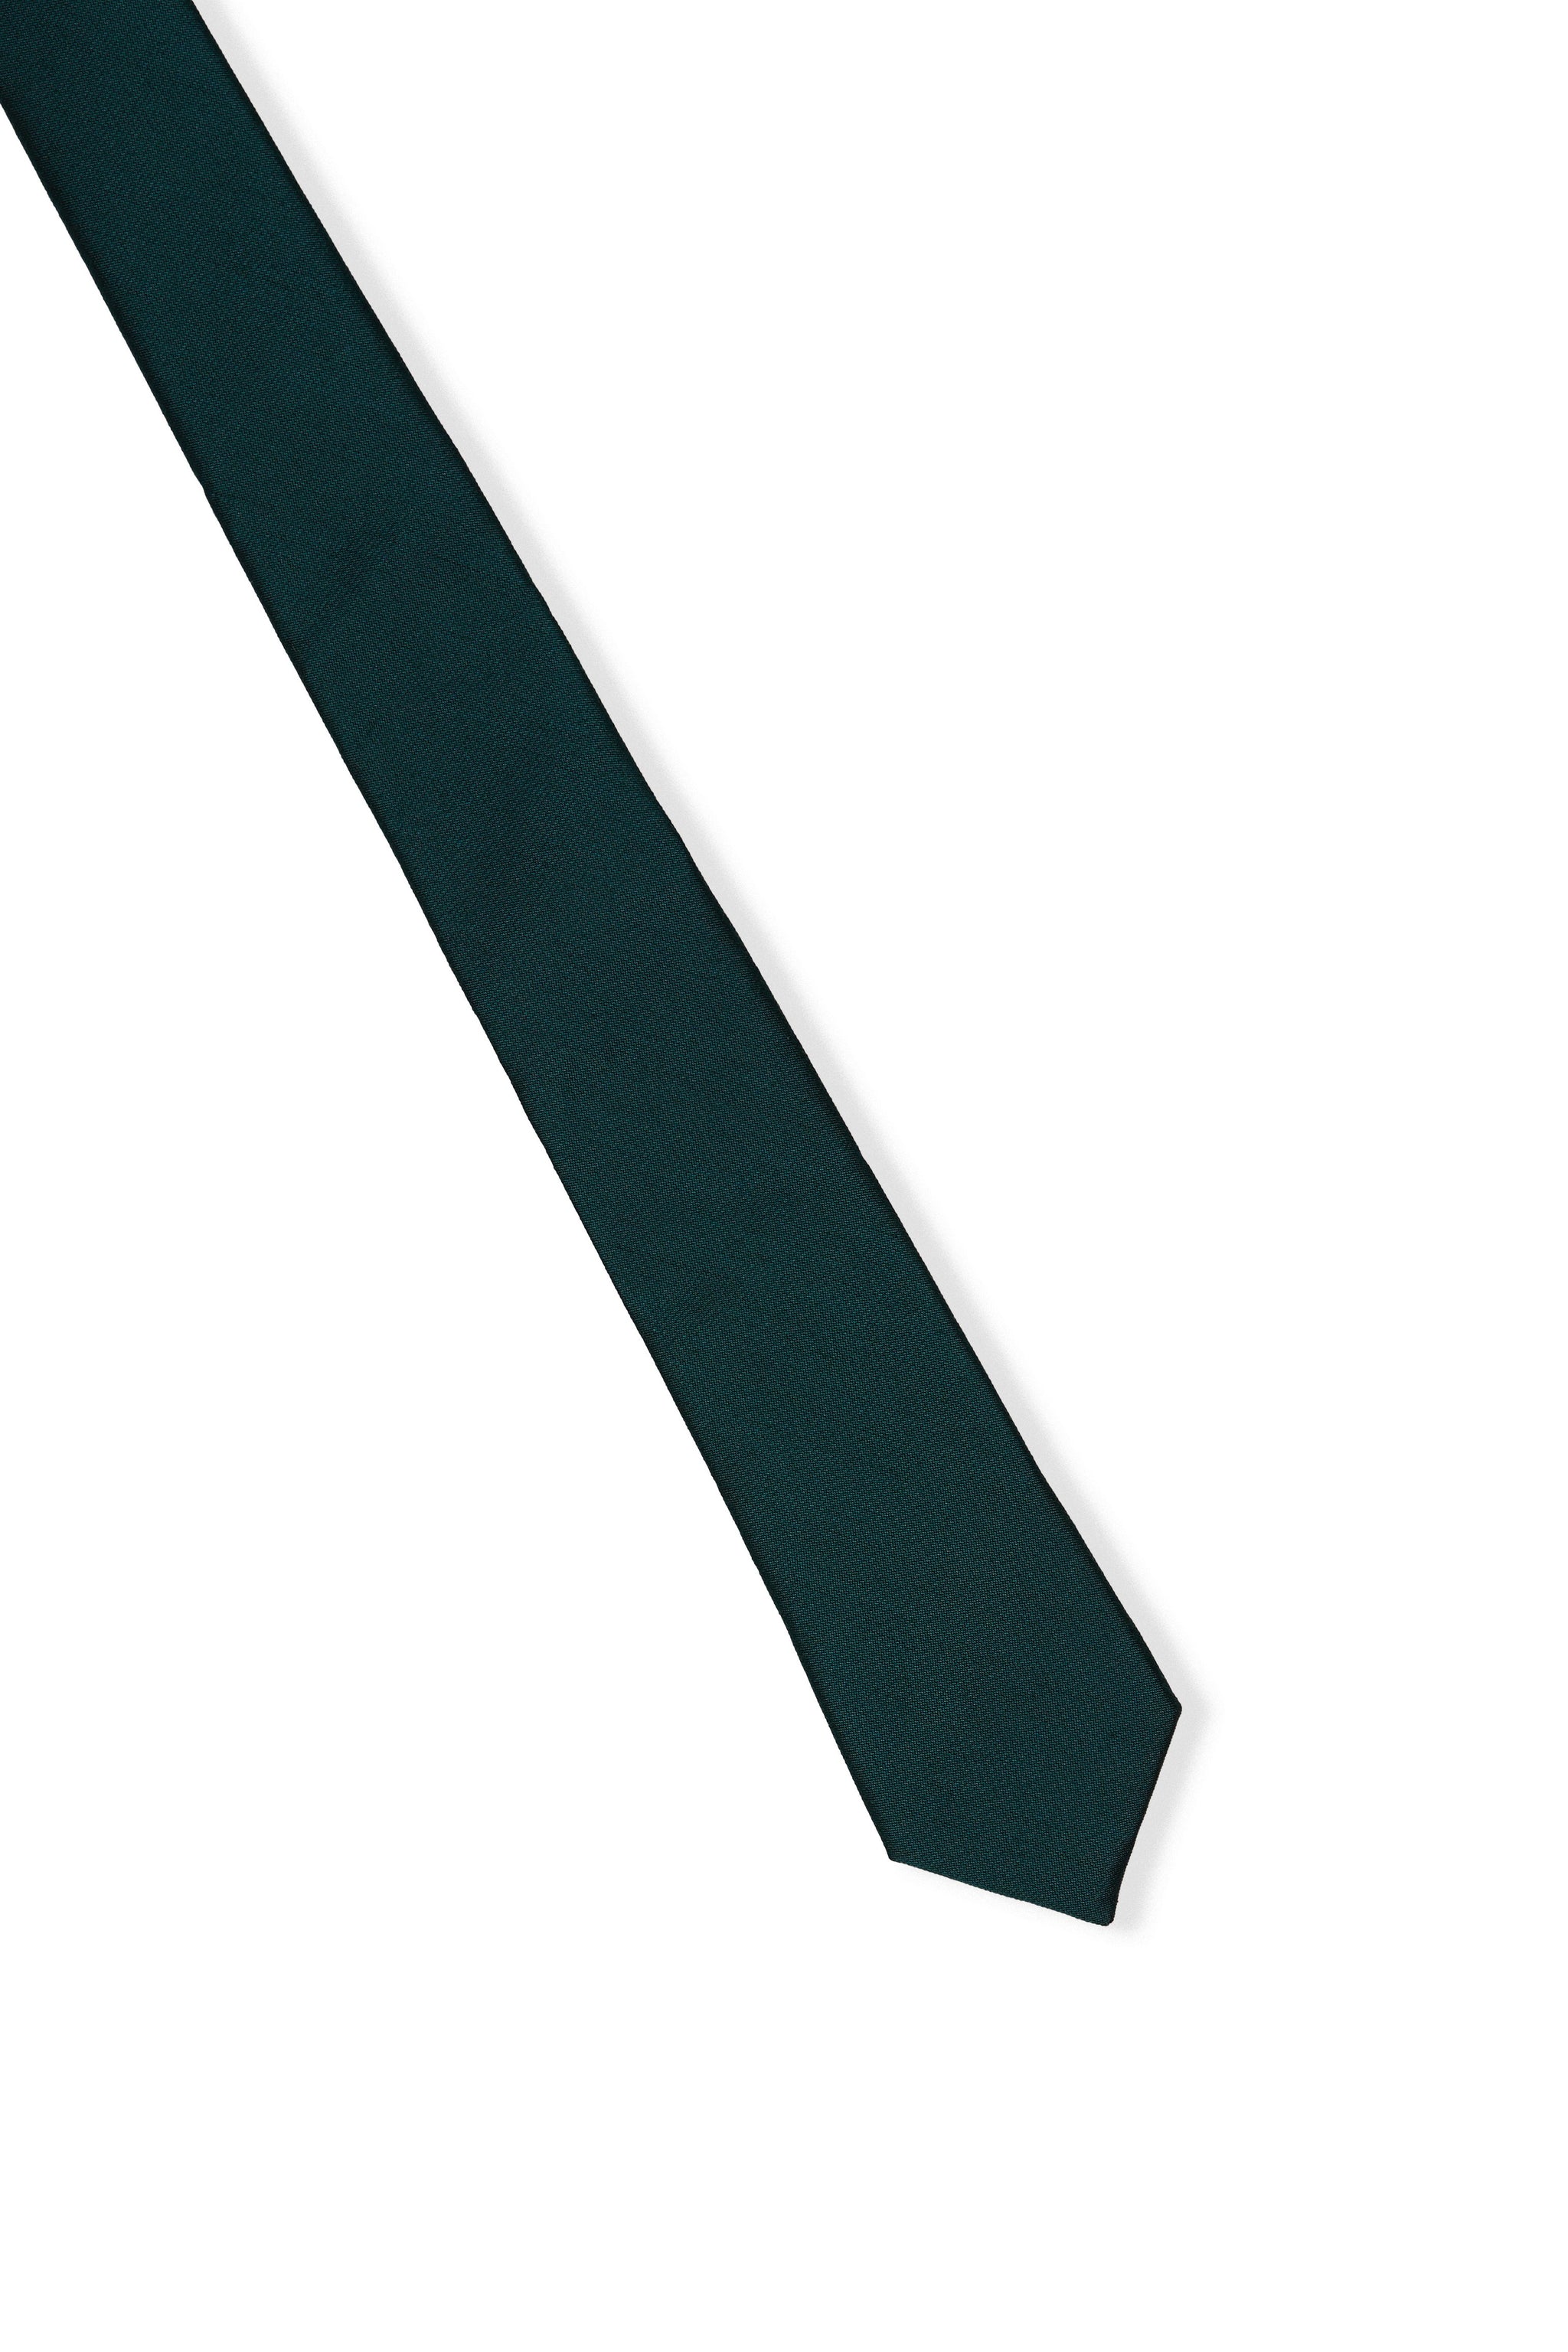 Elevated view of the Simon Necktie in emerald fully extended on a white background showing the width of the necktie.